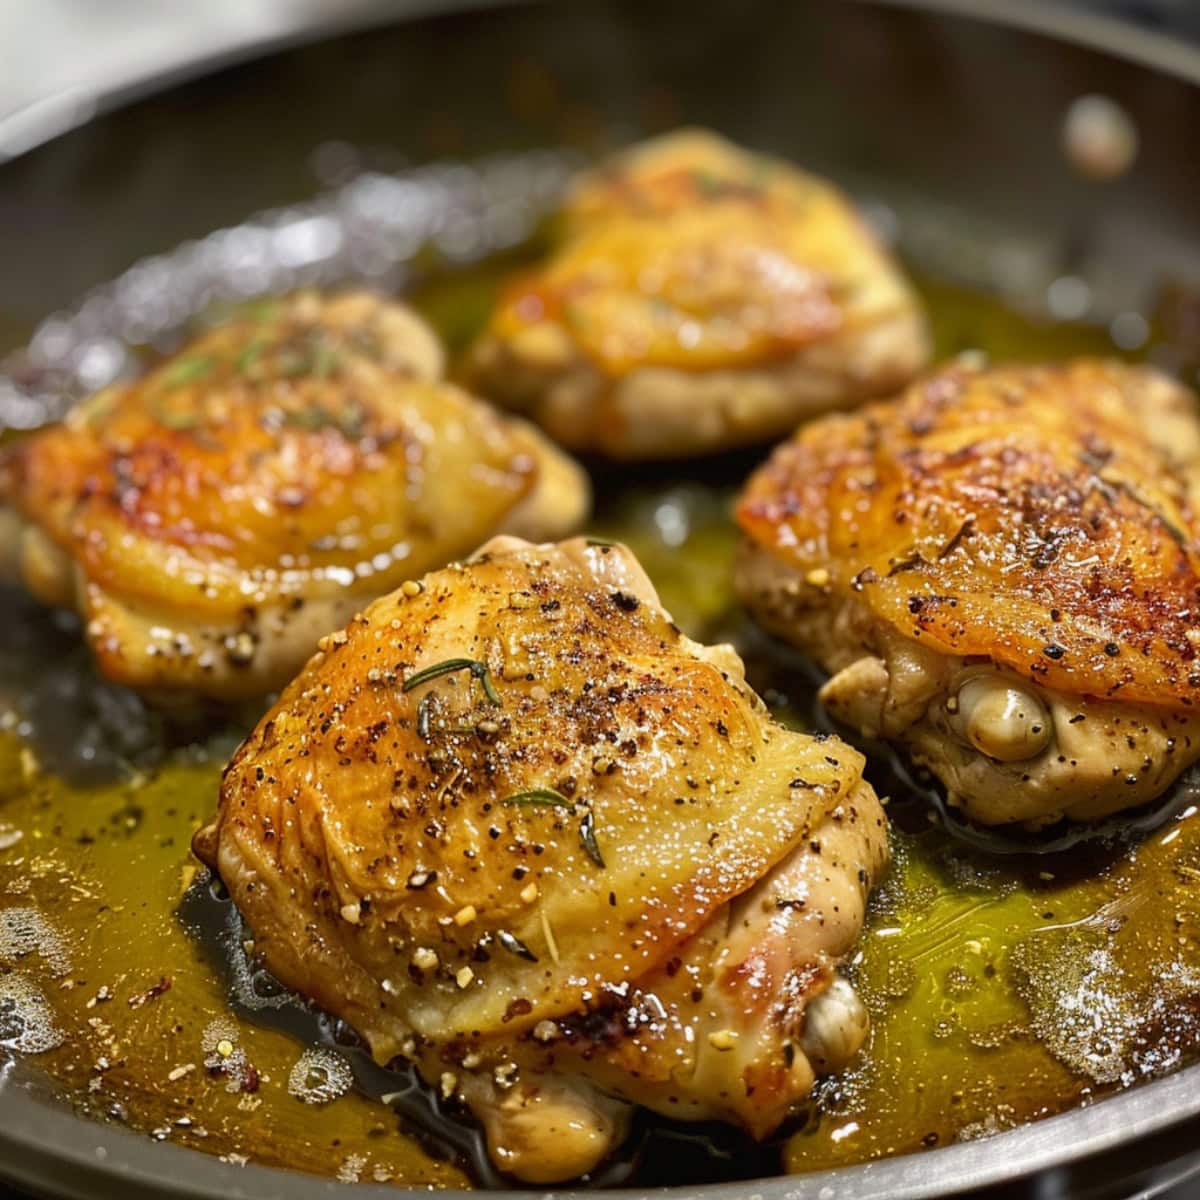 Chicken thighs seared in olive on a metal pan.